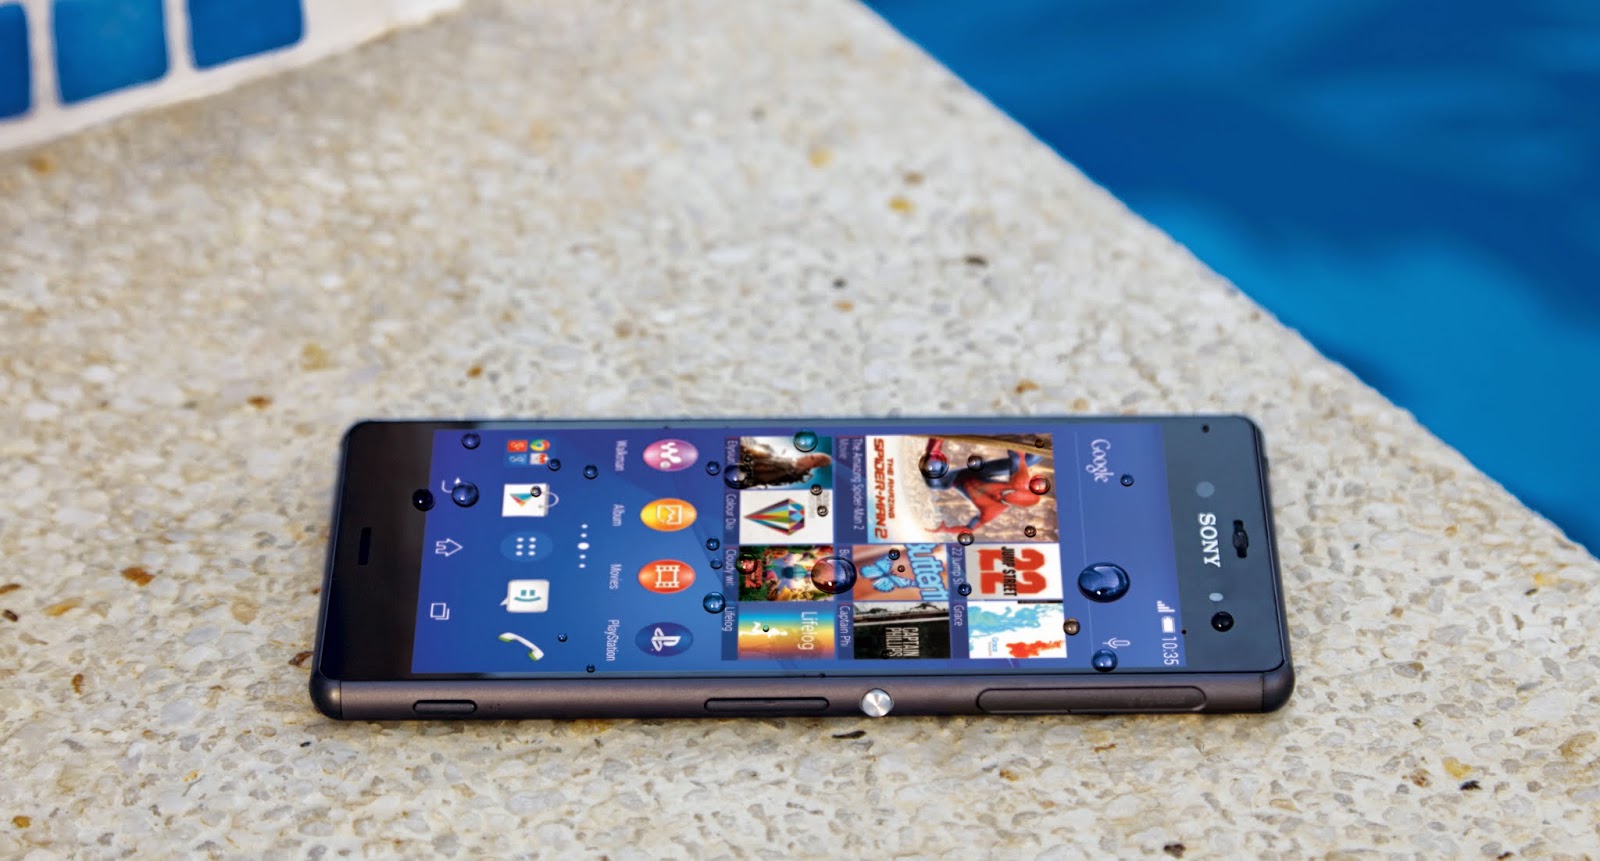 Sony Xperia Z3, Smartphone Tangguh Upgrade Android Lolipop